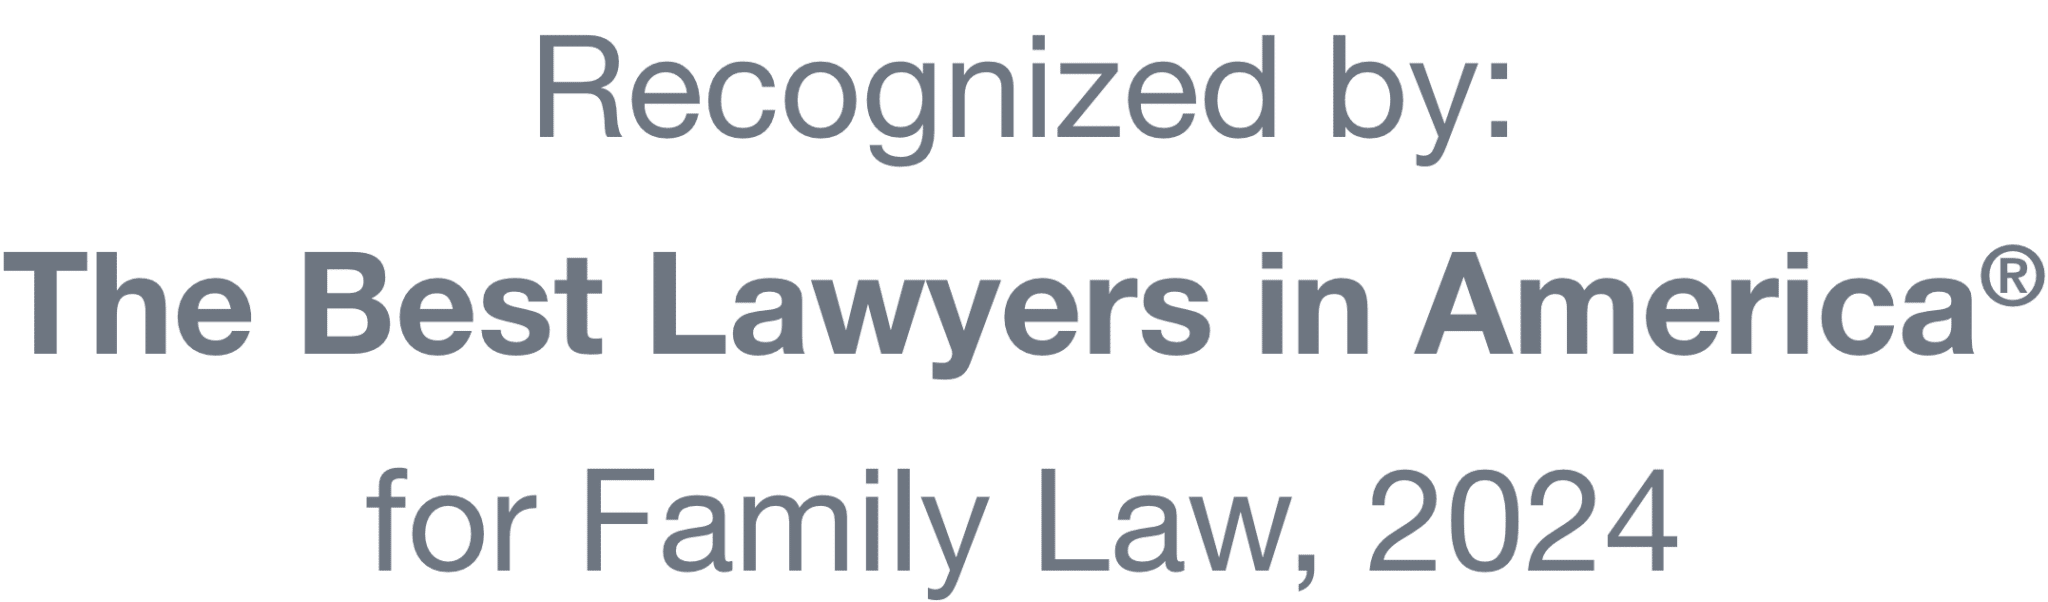 Recognized byThe Best Lawyers in America®for Family Law, 2024